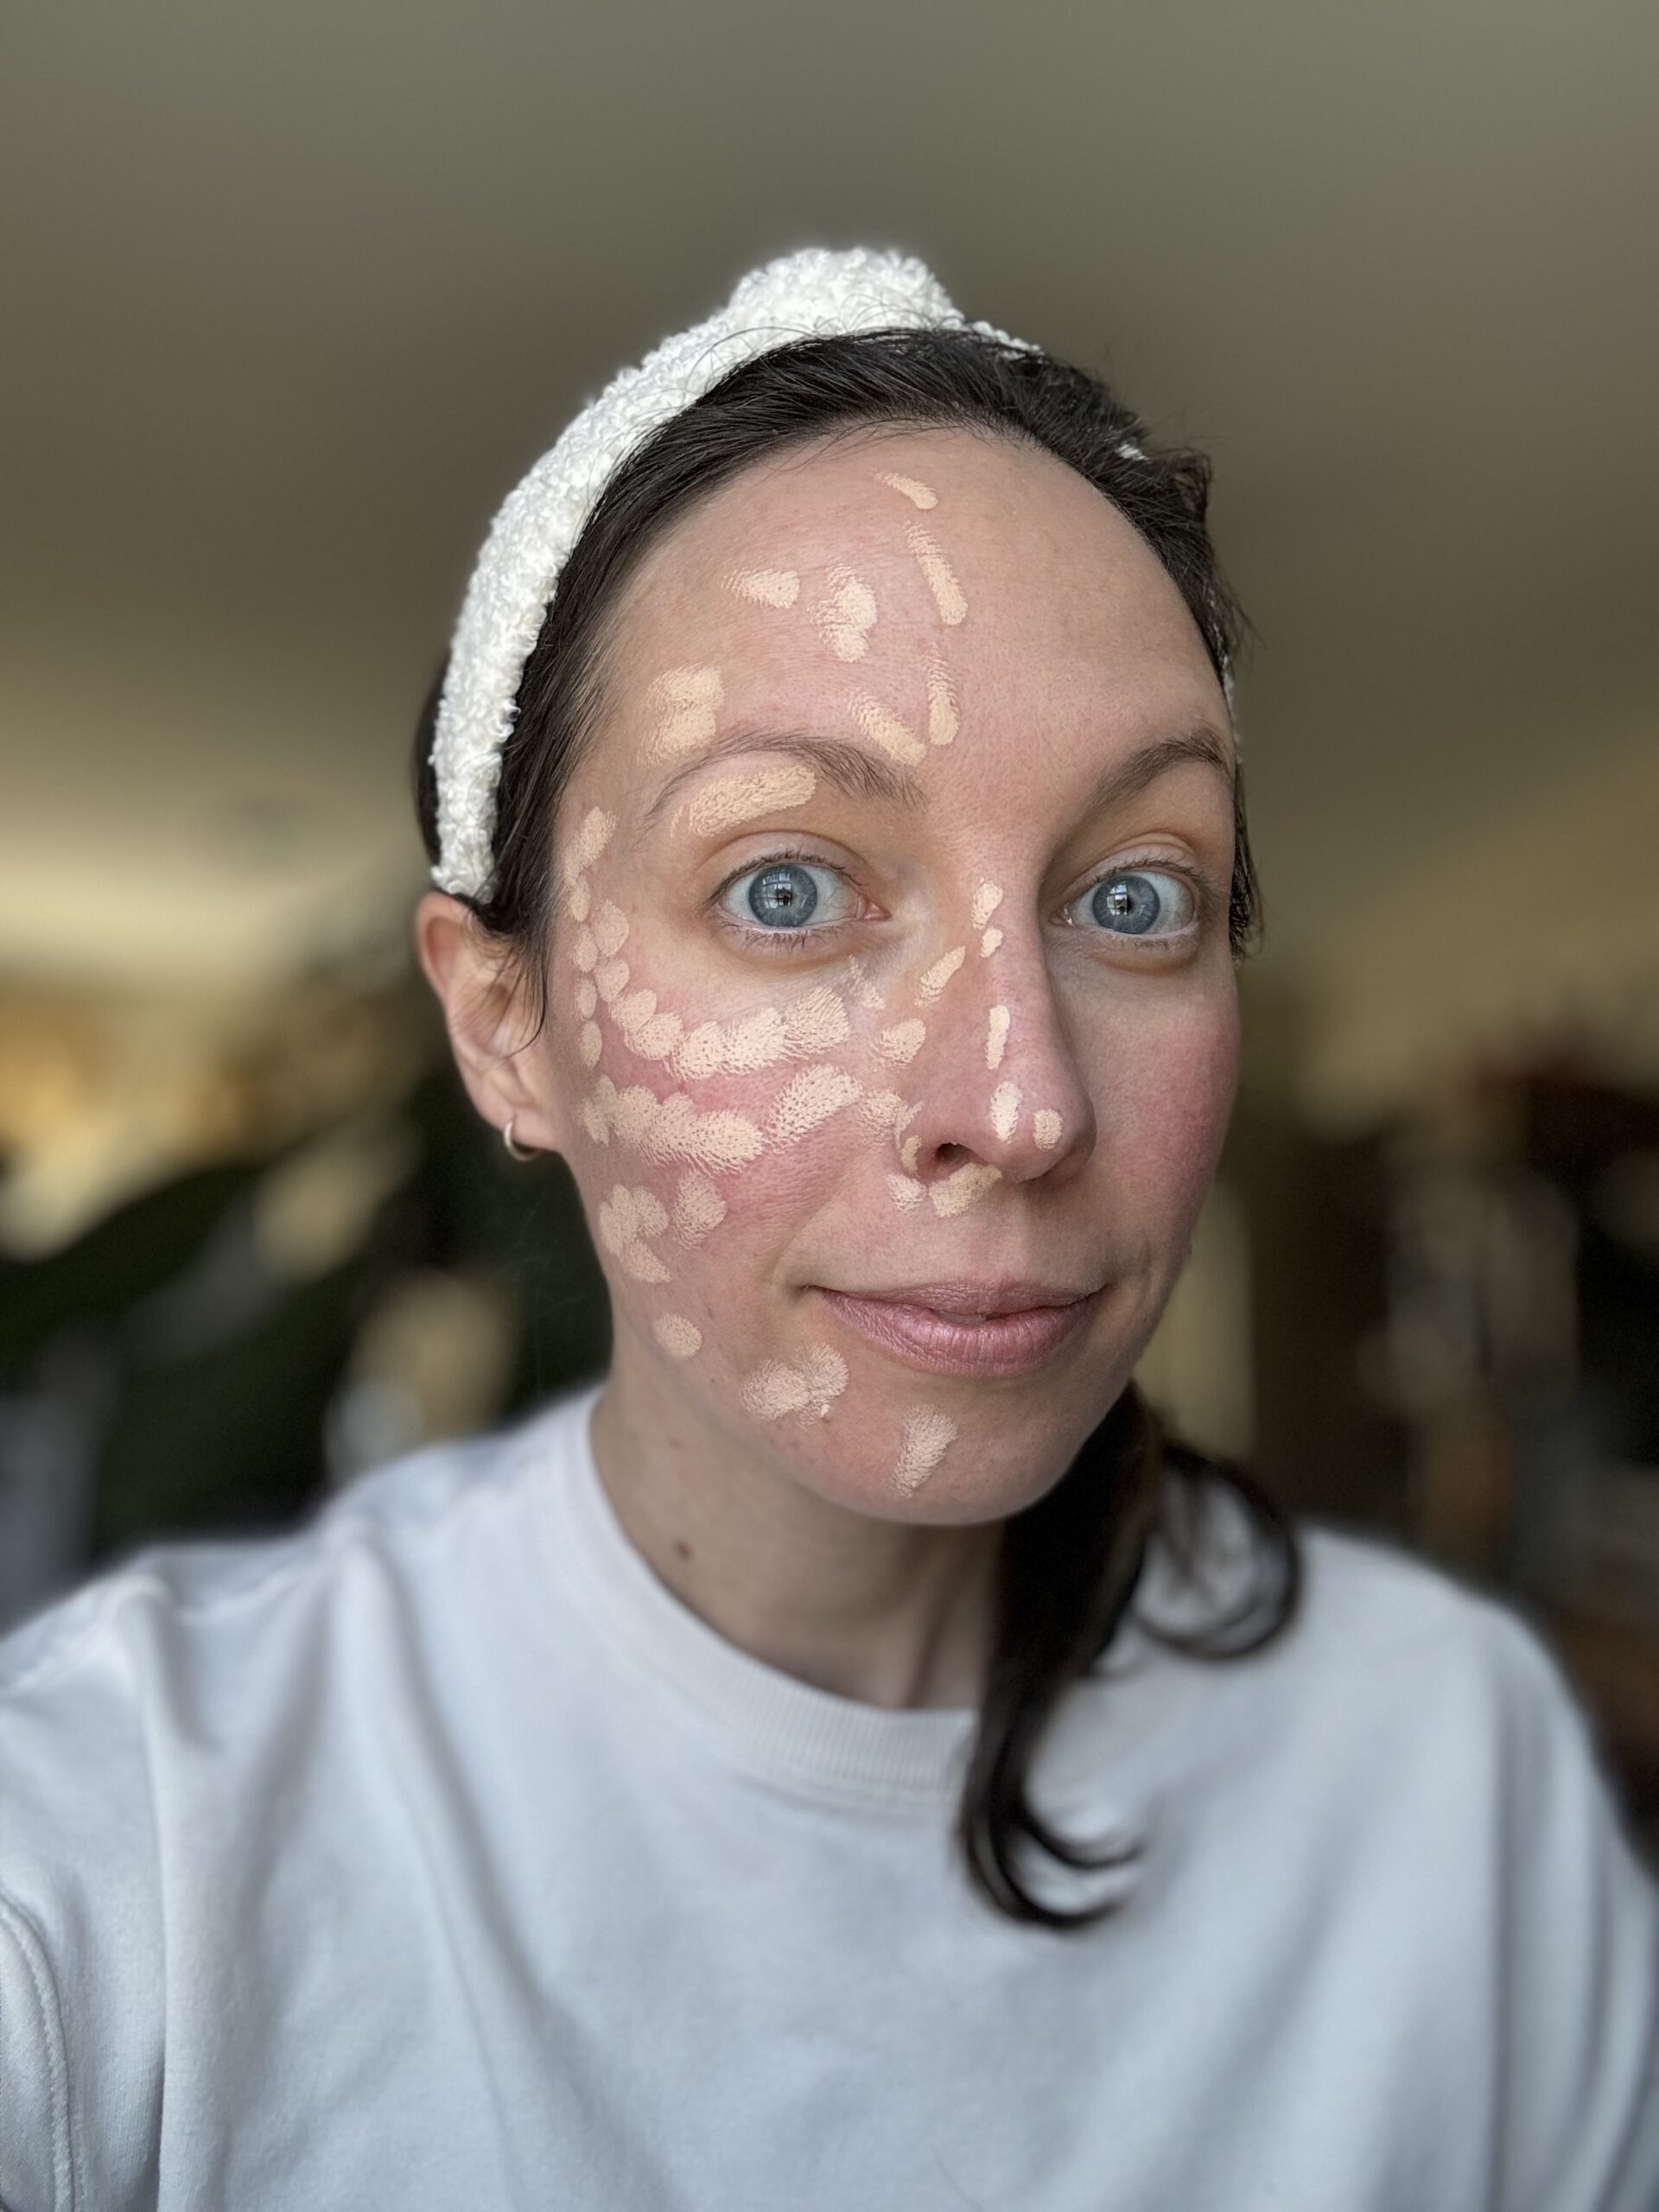 A person with a headband applying foundation makeup on their face.